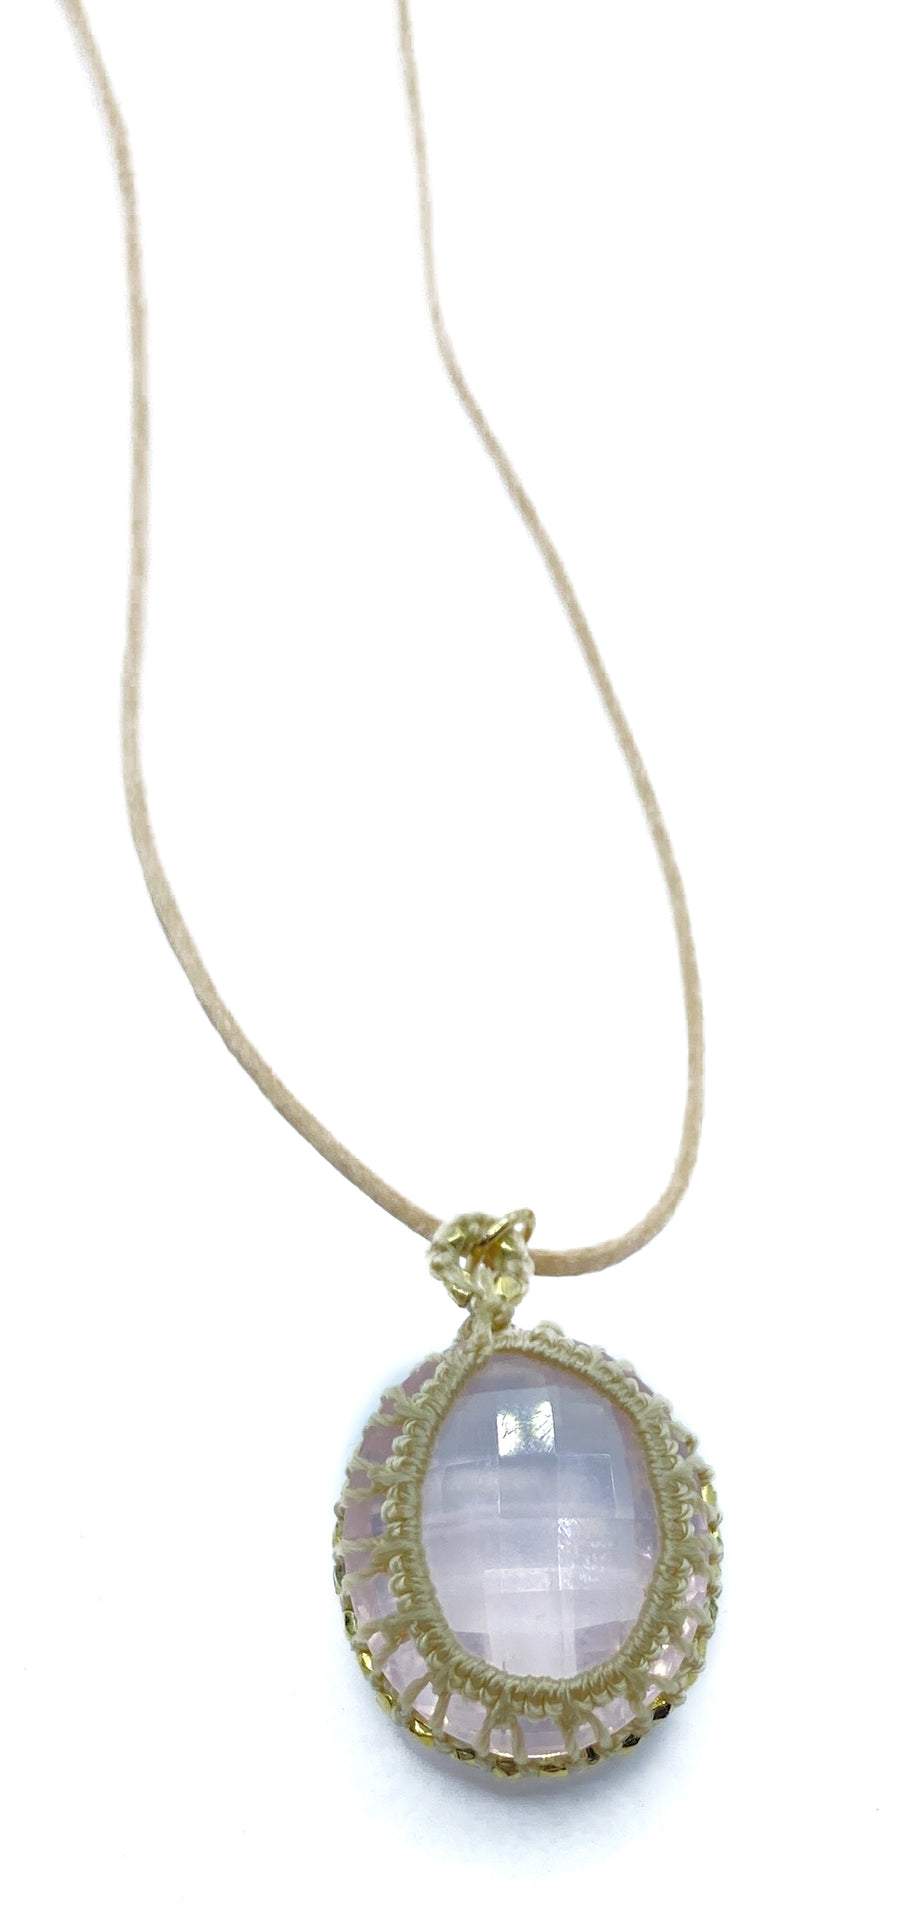 Danielle Welmond | Caged rose quartz with taupe cord and 14kt gold vermeil beads on natural cord